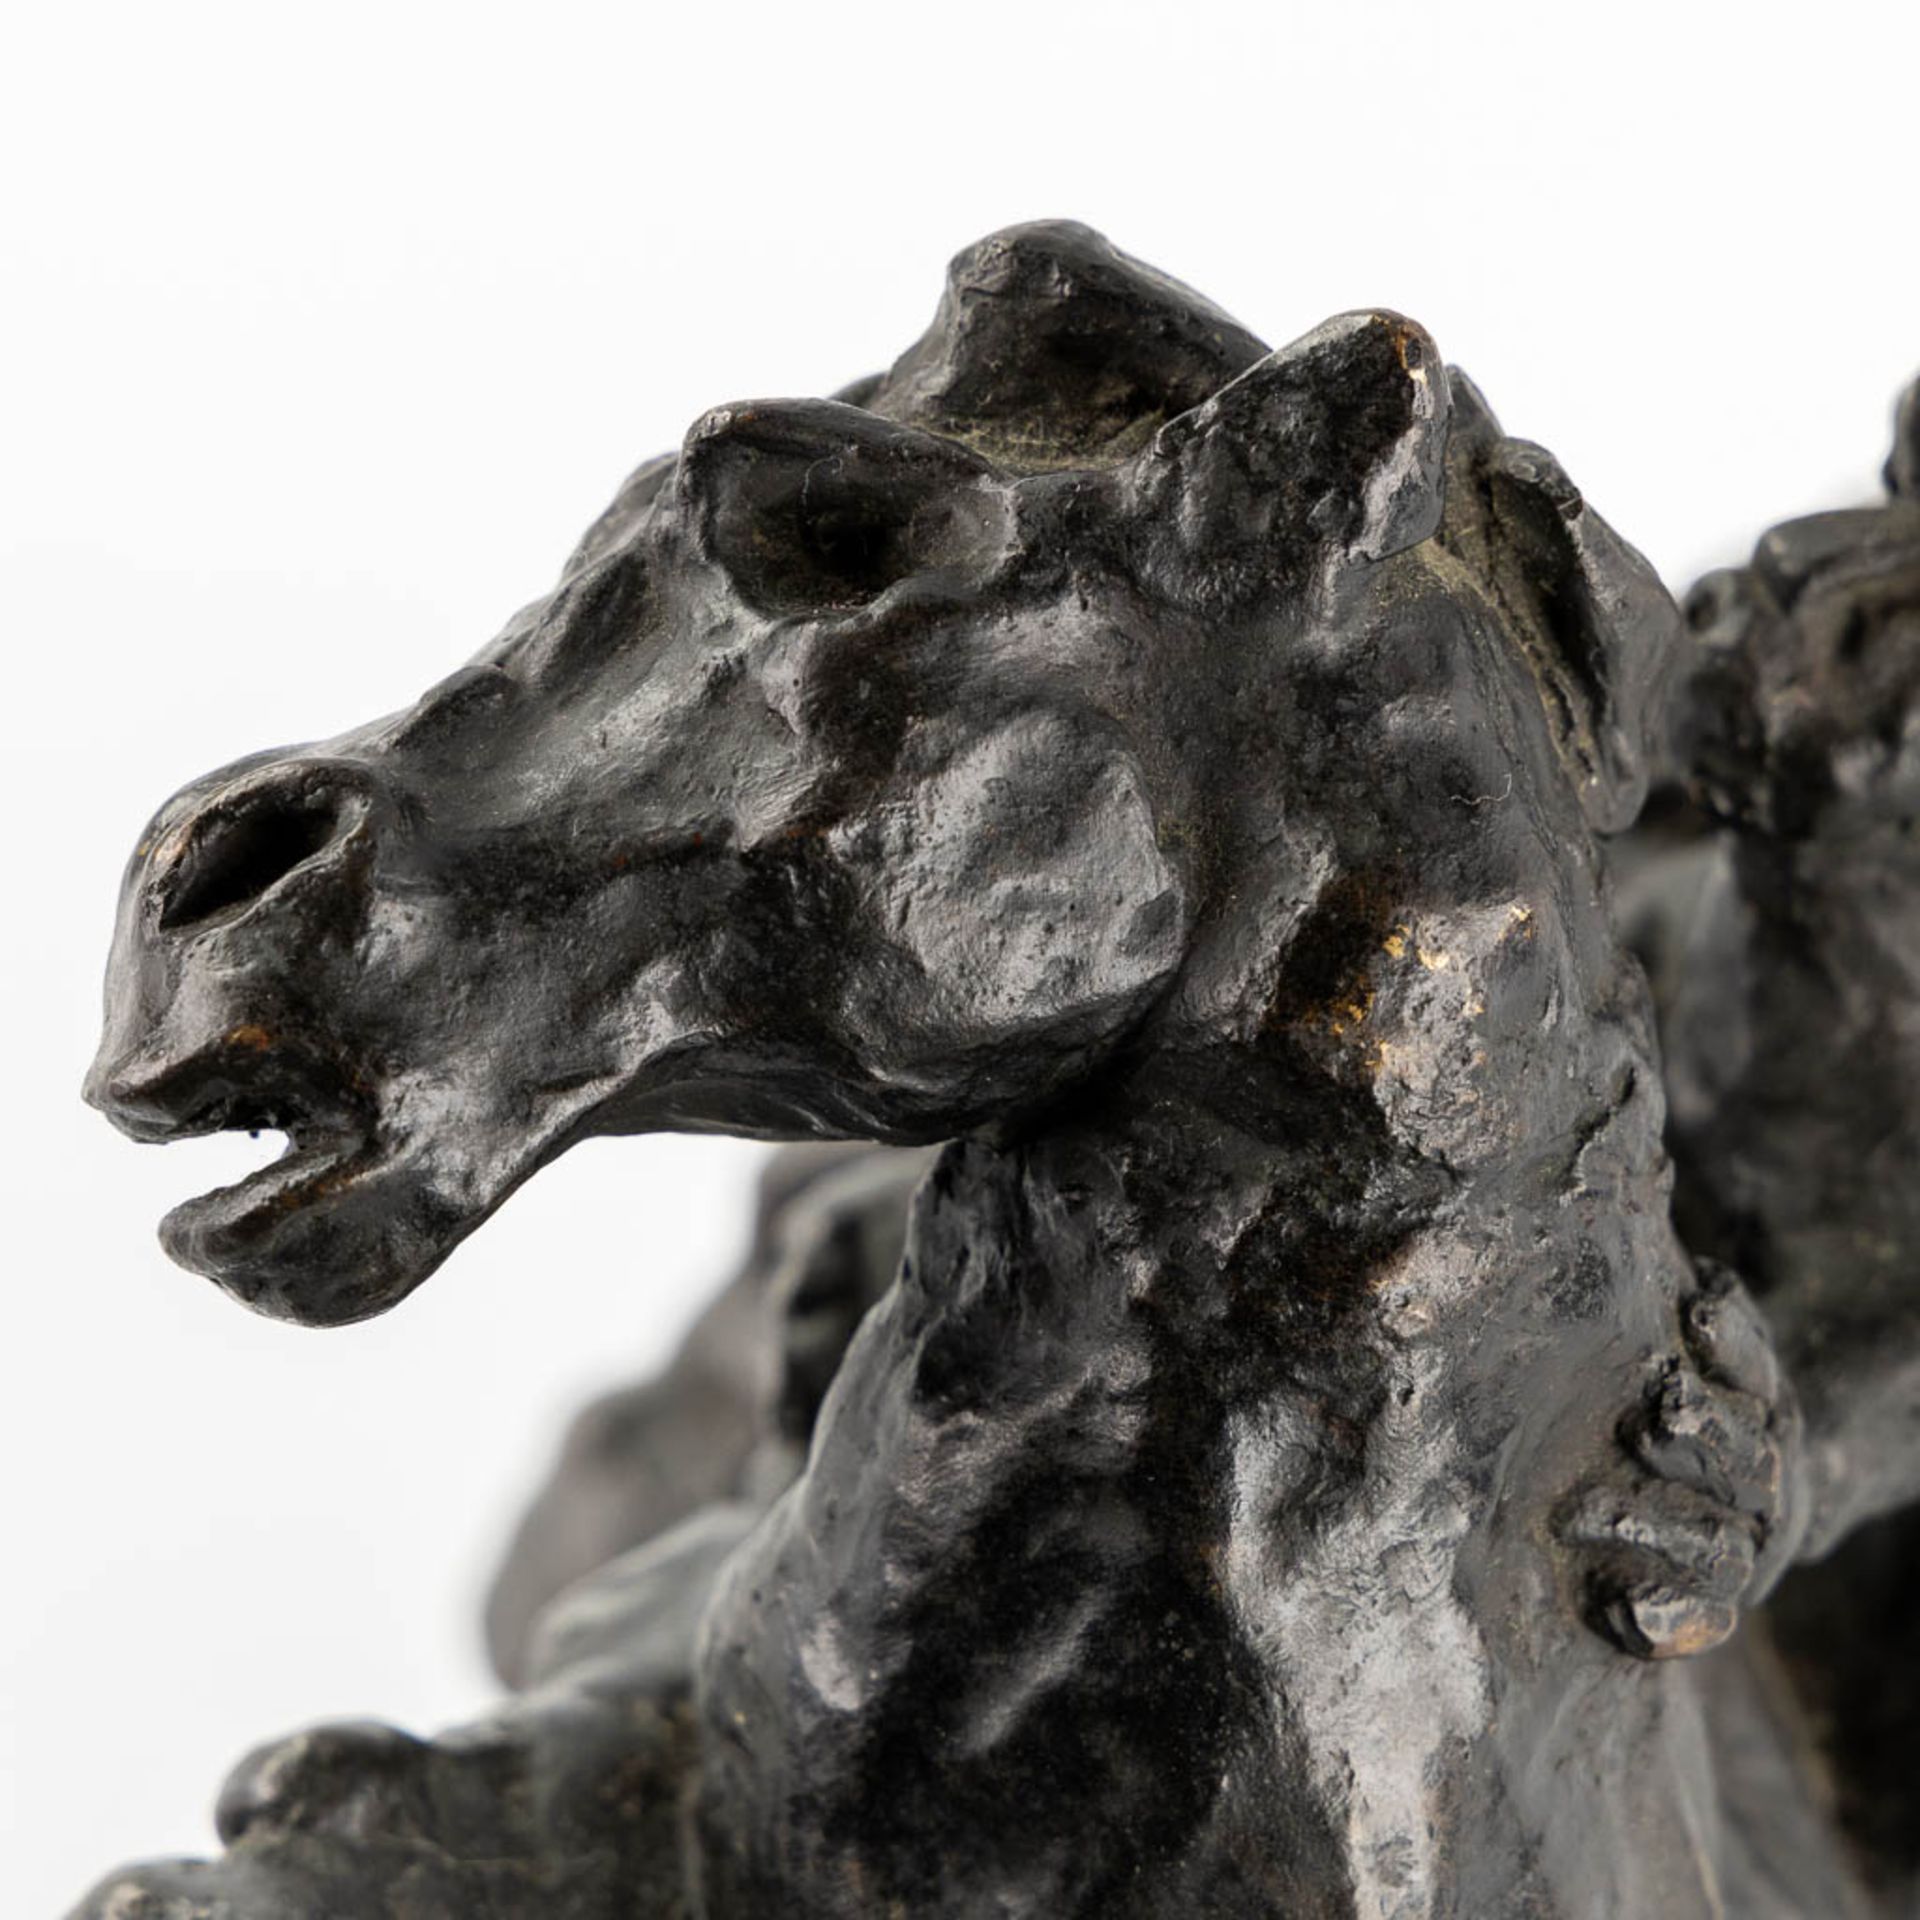 P. LAMBERT (XX) 'Riding a horse' patinated bronze, Ducros Foundry Mark. (L:15 x W:27 x H:28 cm) - Image 7 of 11